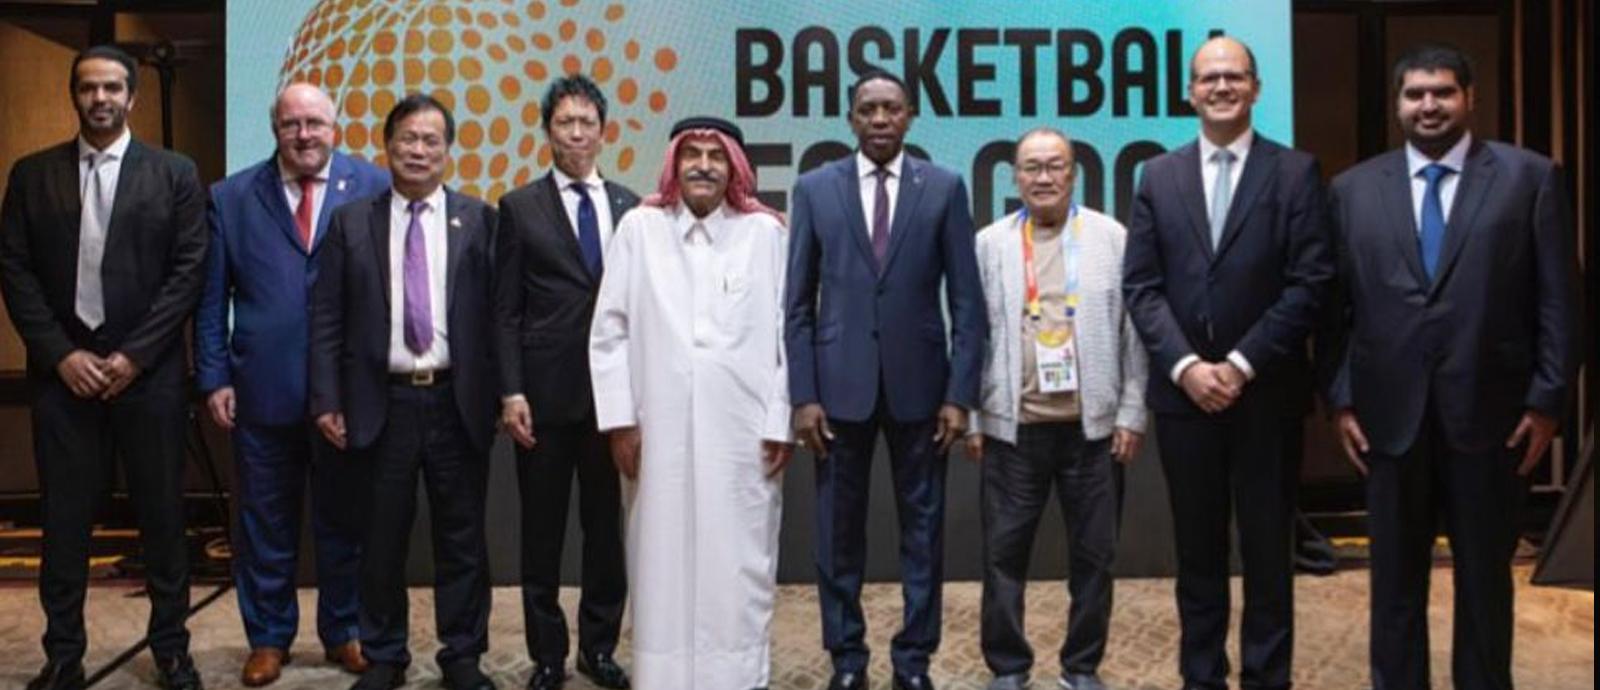 Sheikh Saud appointed to FIBA Foundation Board of Directors